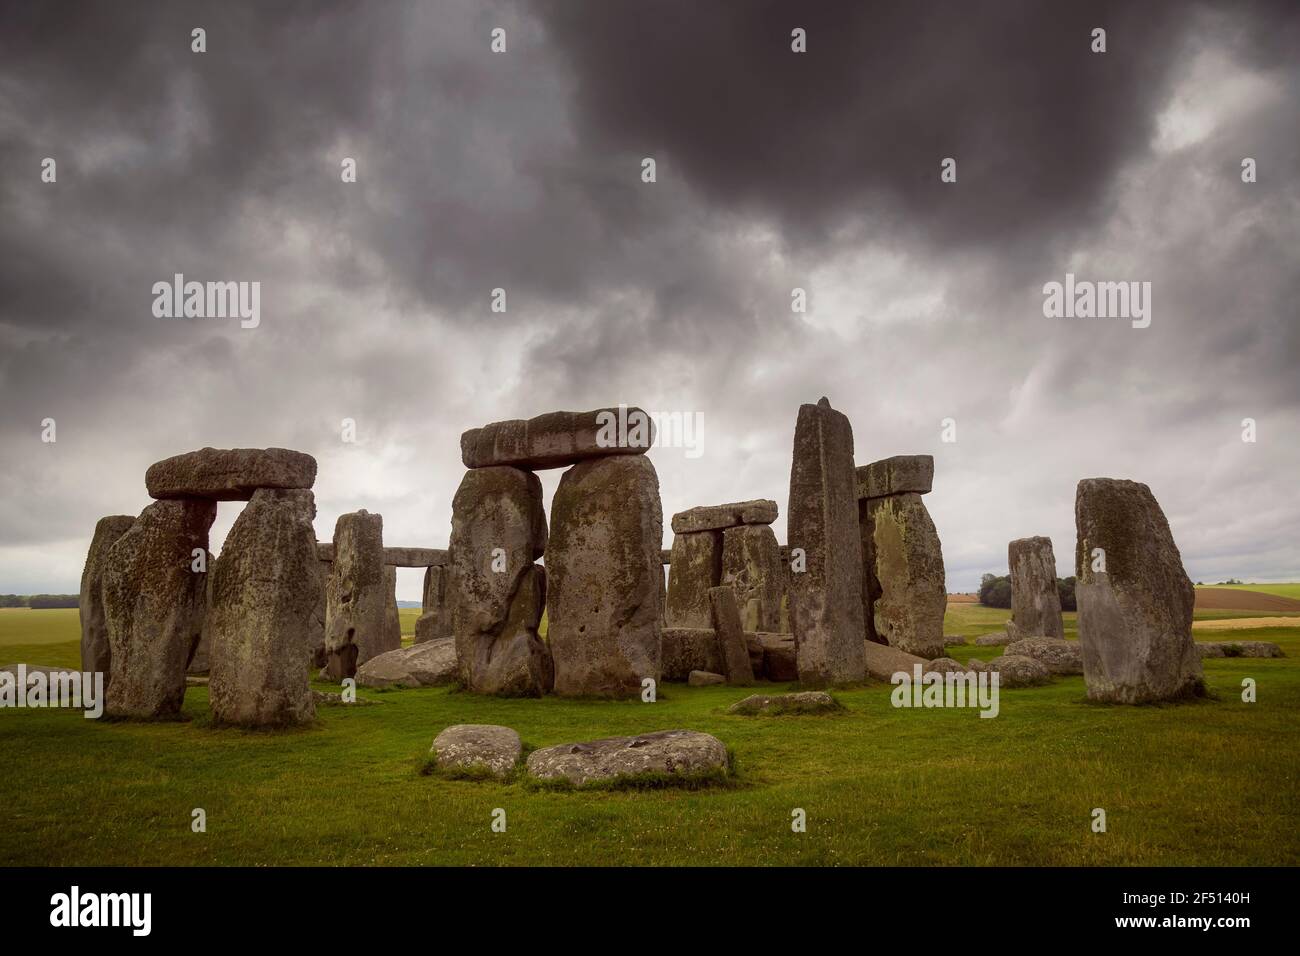 Stonehenge, the famous ancient monument under stormy grey clouds. Stock Photo